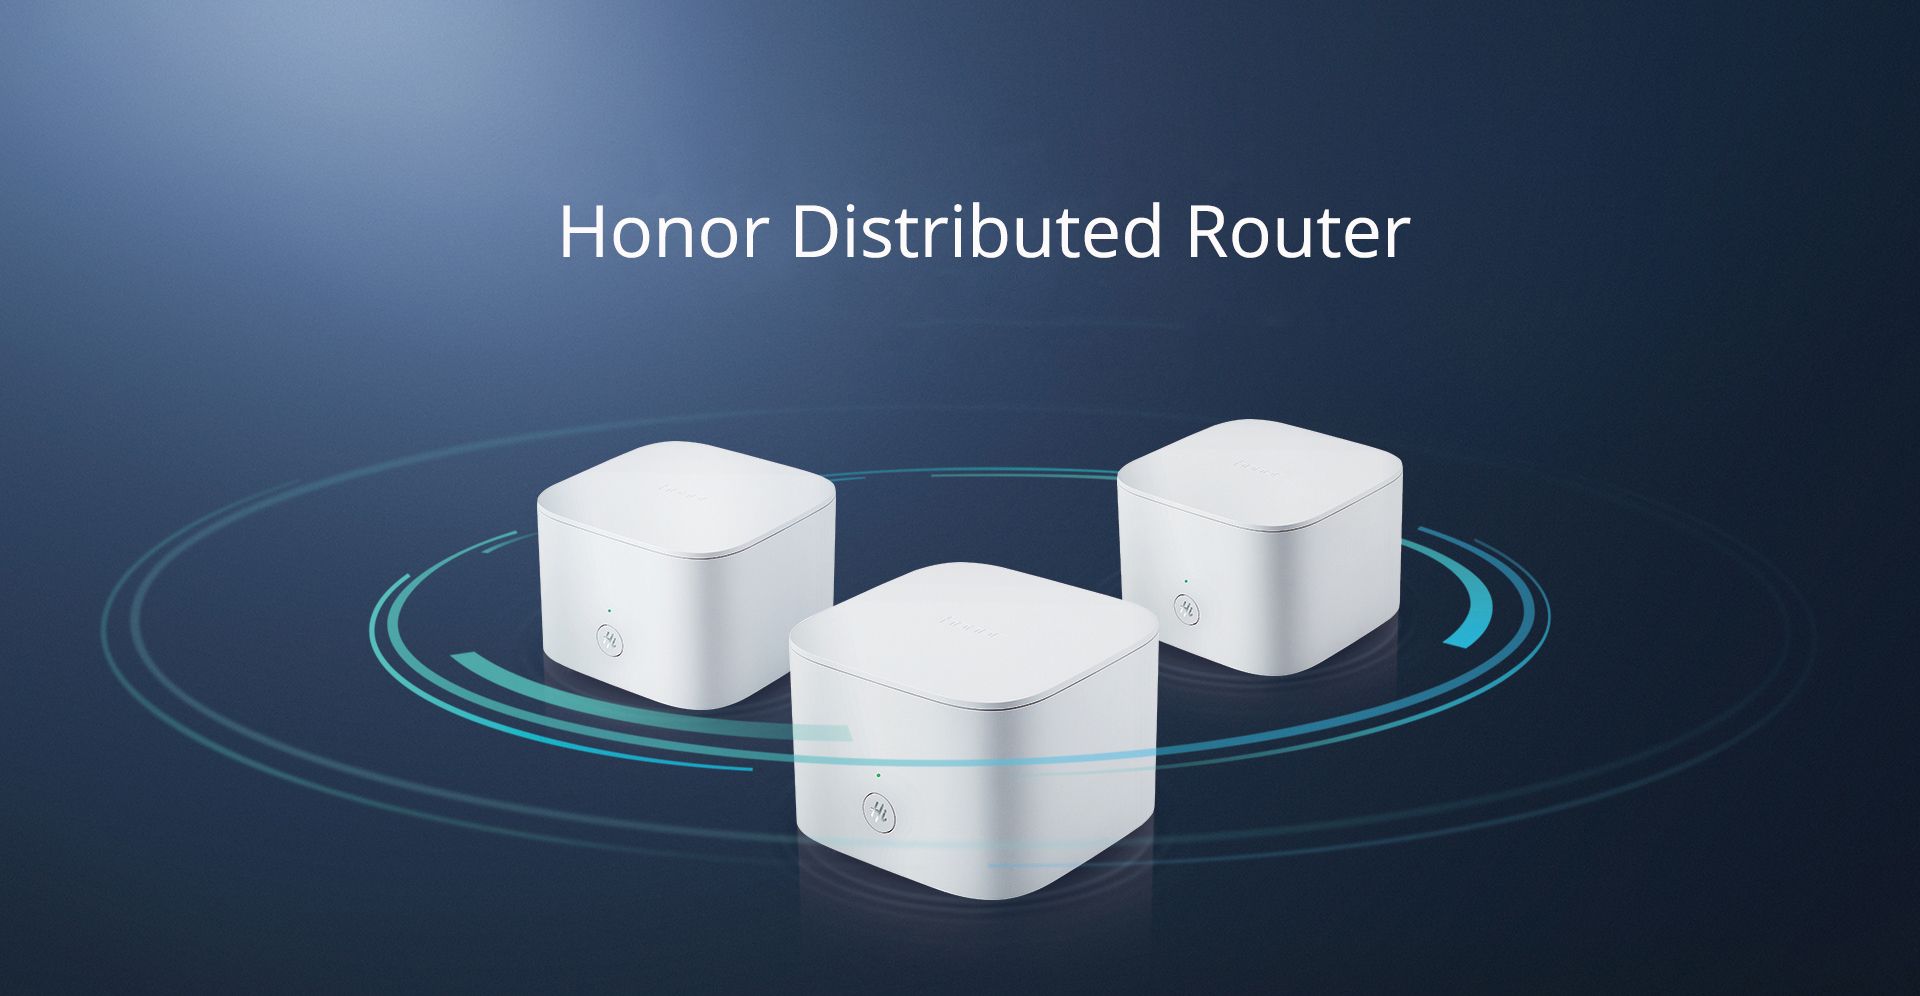 Honor-Distributed-Router-Dual-Band-24G-5G-1167Mbps-WiFi-Repeater-Wireless-WiFi-Router-Smart-Router-S-1641331